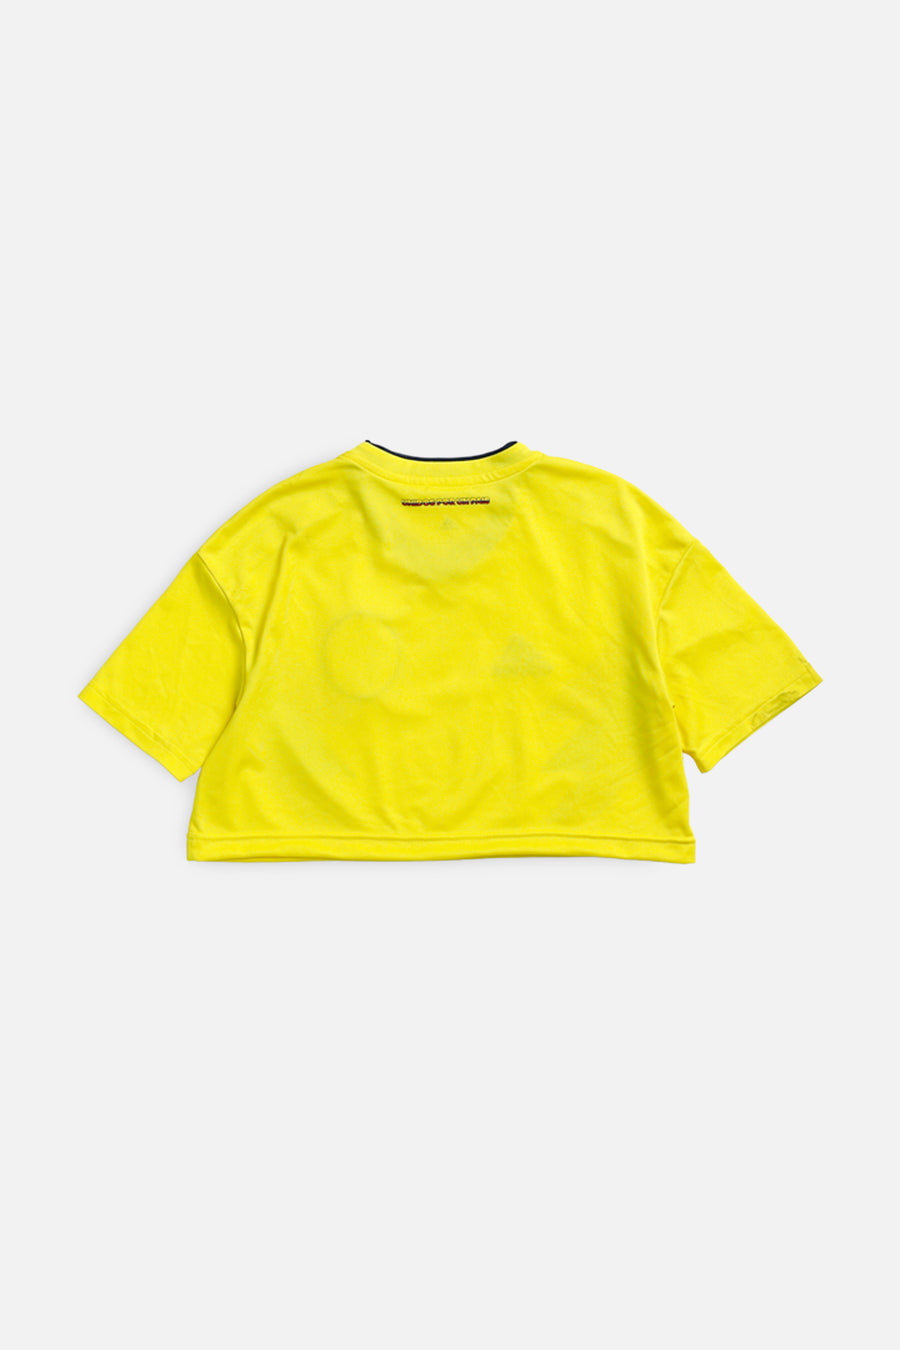 Rework Crop Colombia Soccer Jersey - XS